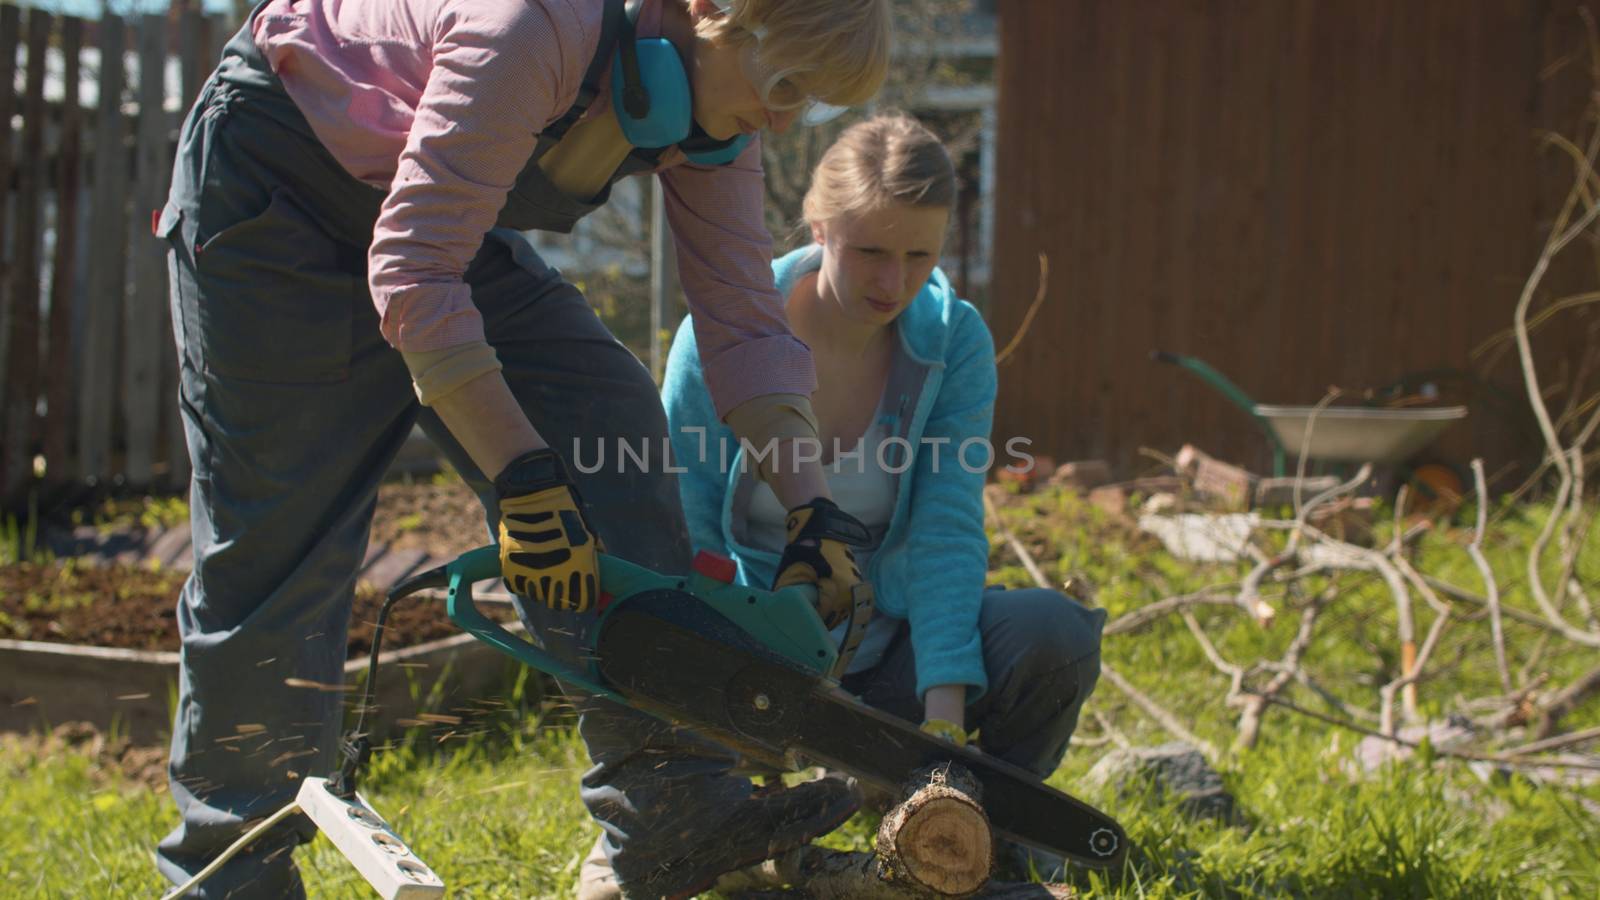 Two women working in the courtyard of country house. Mature cutting tree with an electric chain saw, young helping she. Active and healthy lifestyle concept